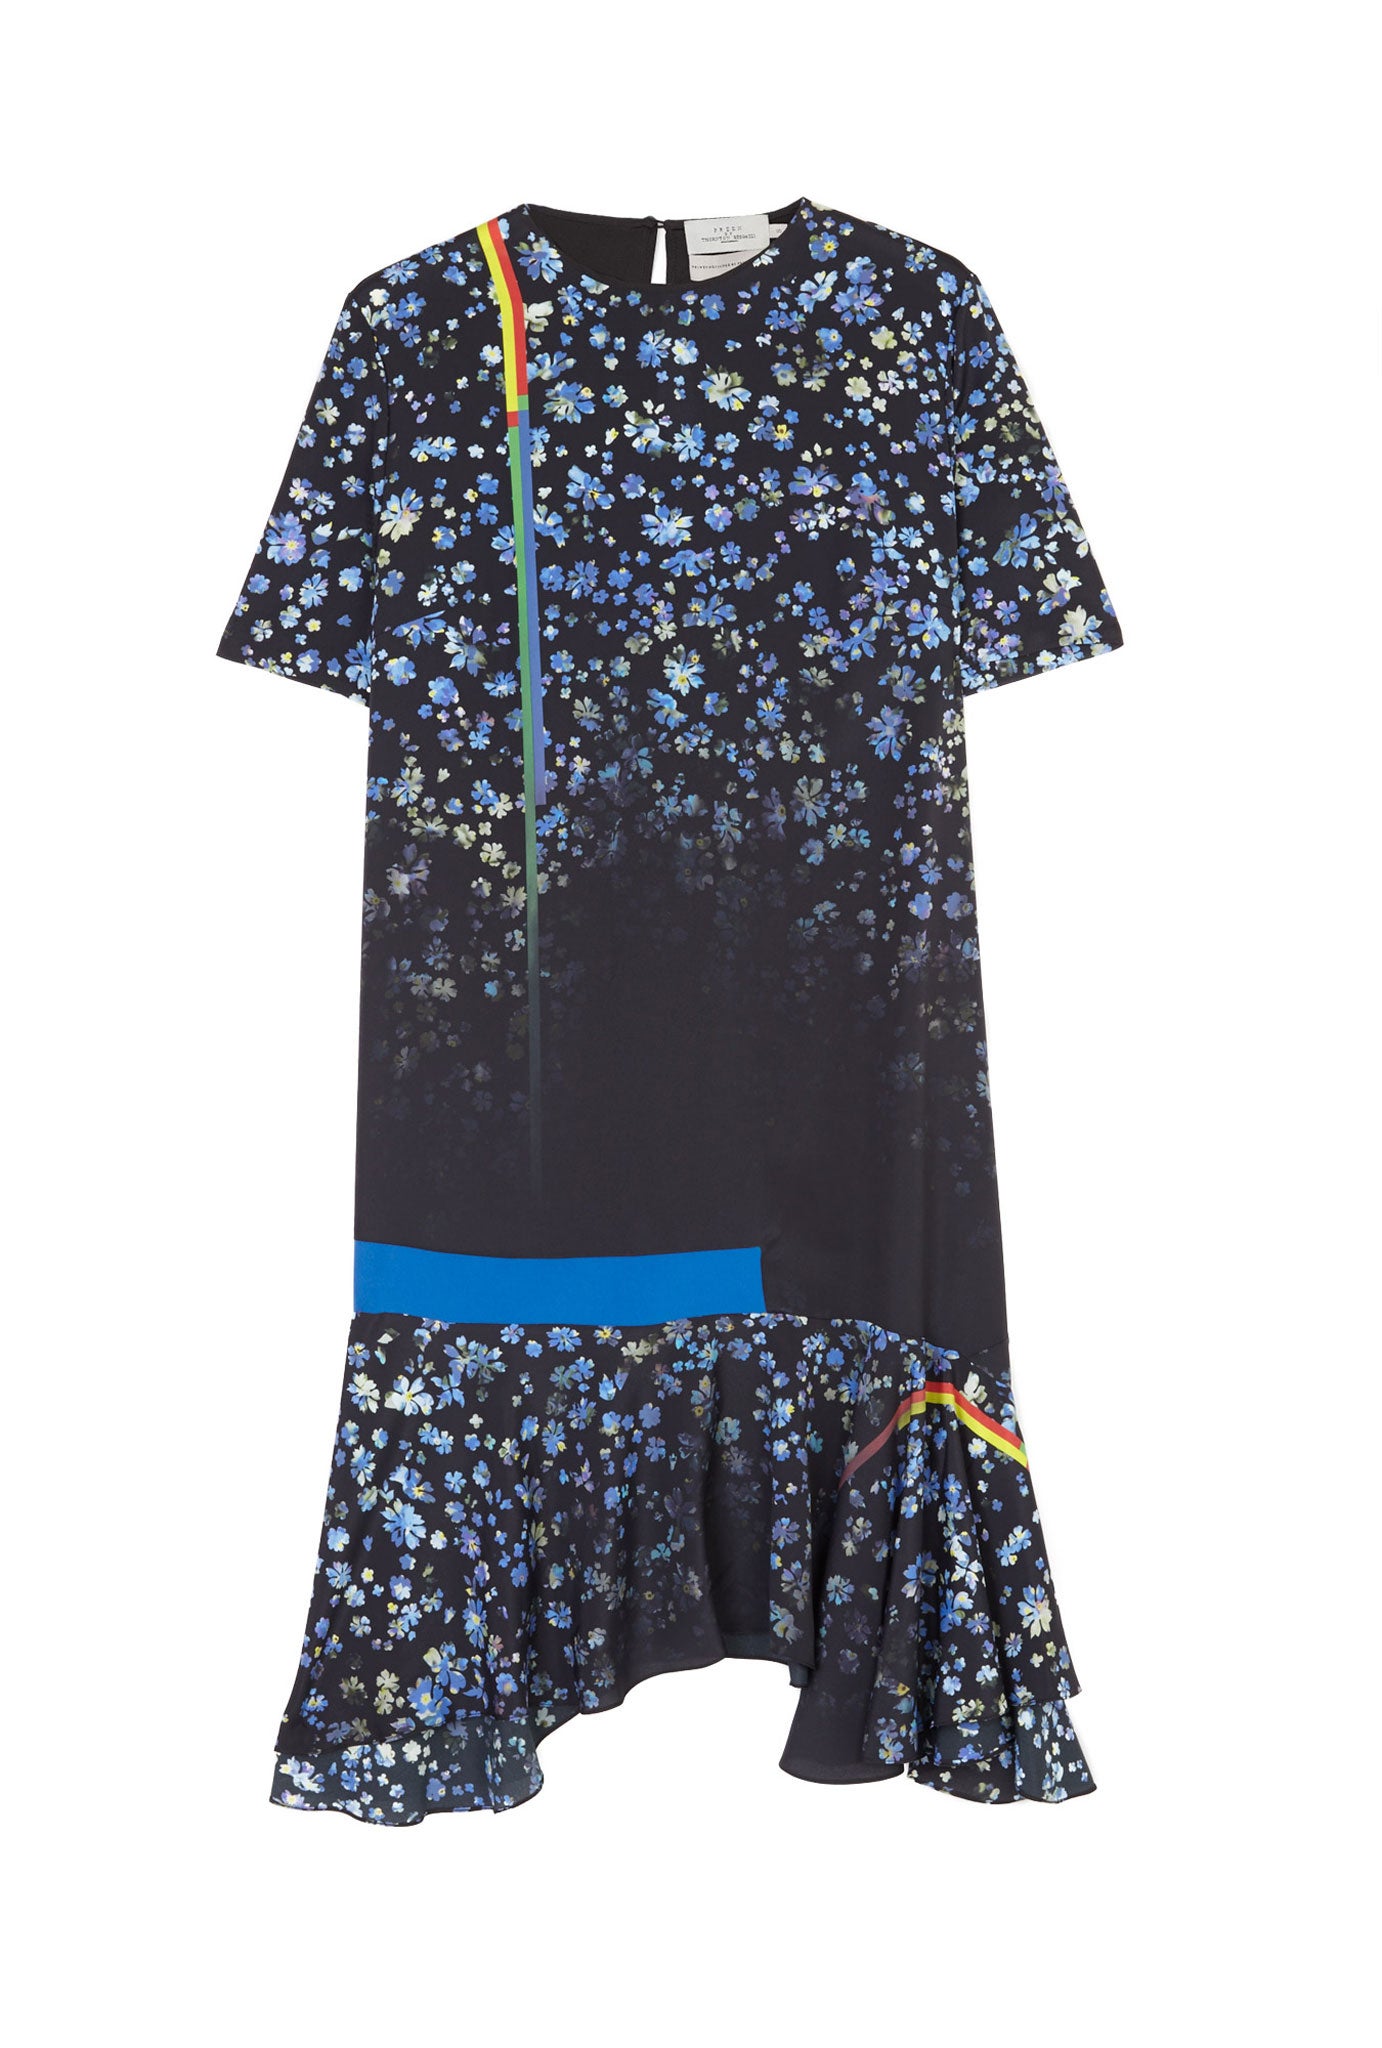 This Wylie dress from Preen is the high-fashion real deal